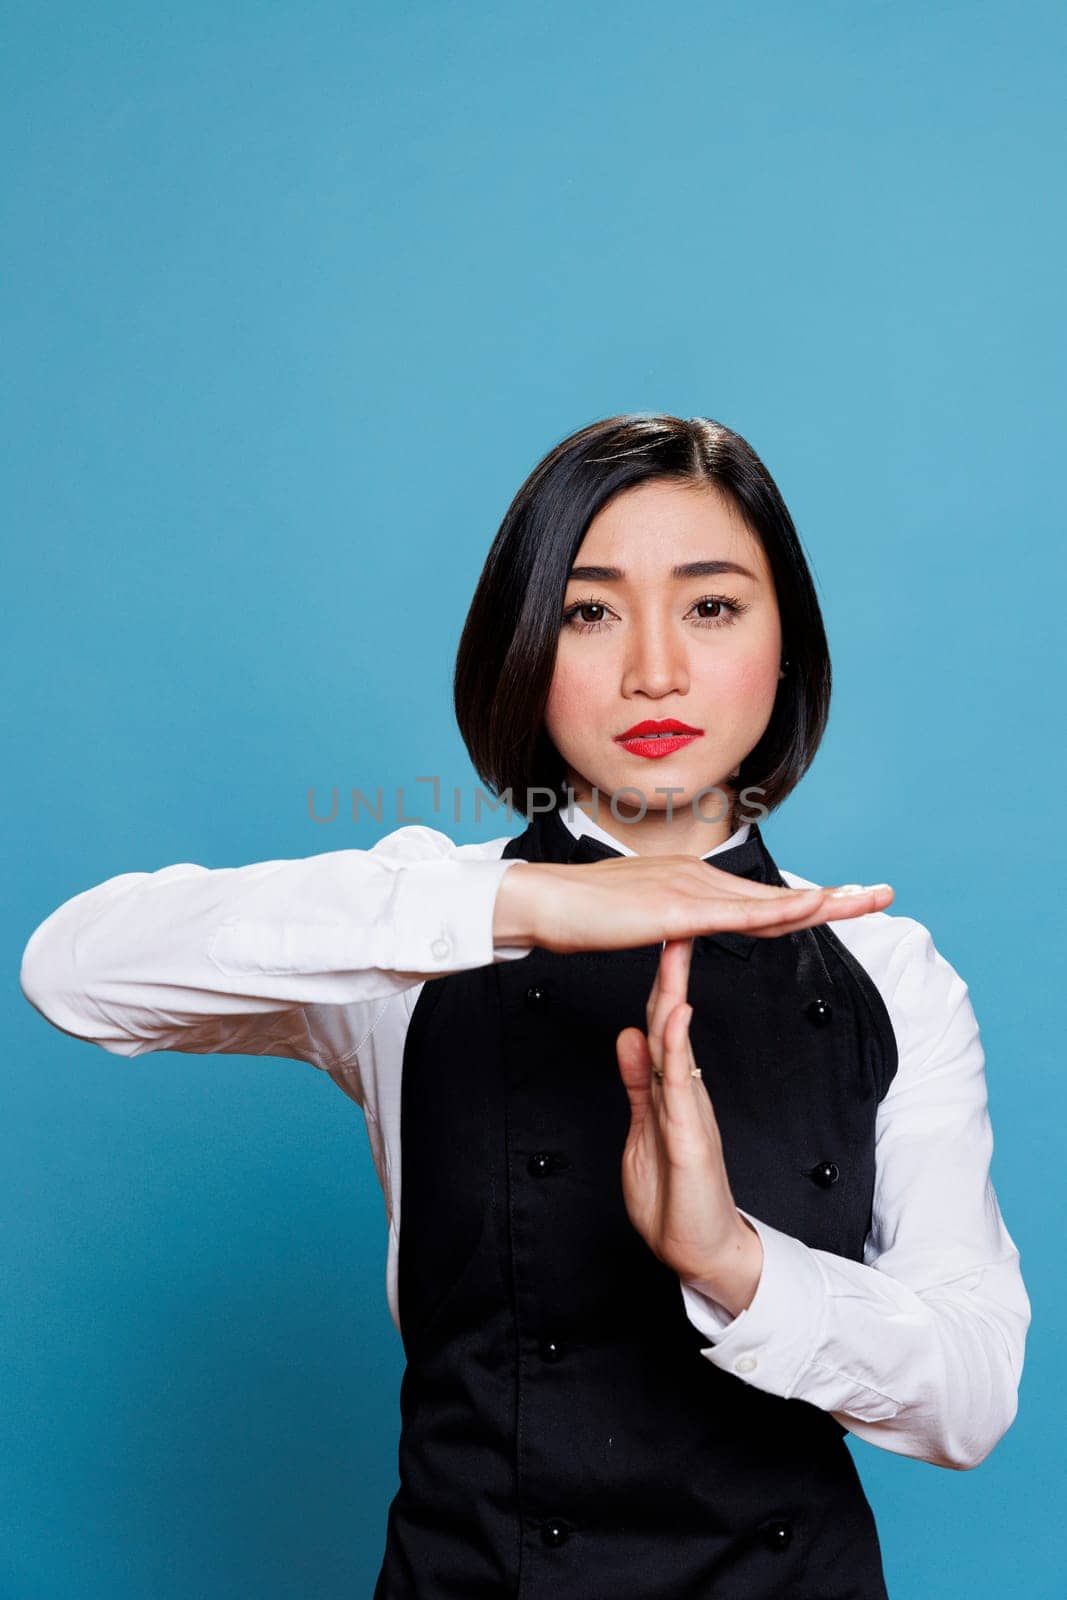 Serious asian waitress in uniform showing timeout sign with hands, asking to take break portrait. Young woman receptionist making interruption and pause gesture while looking at camera